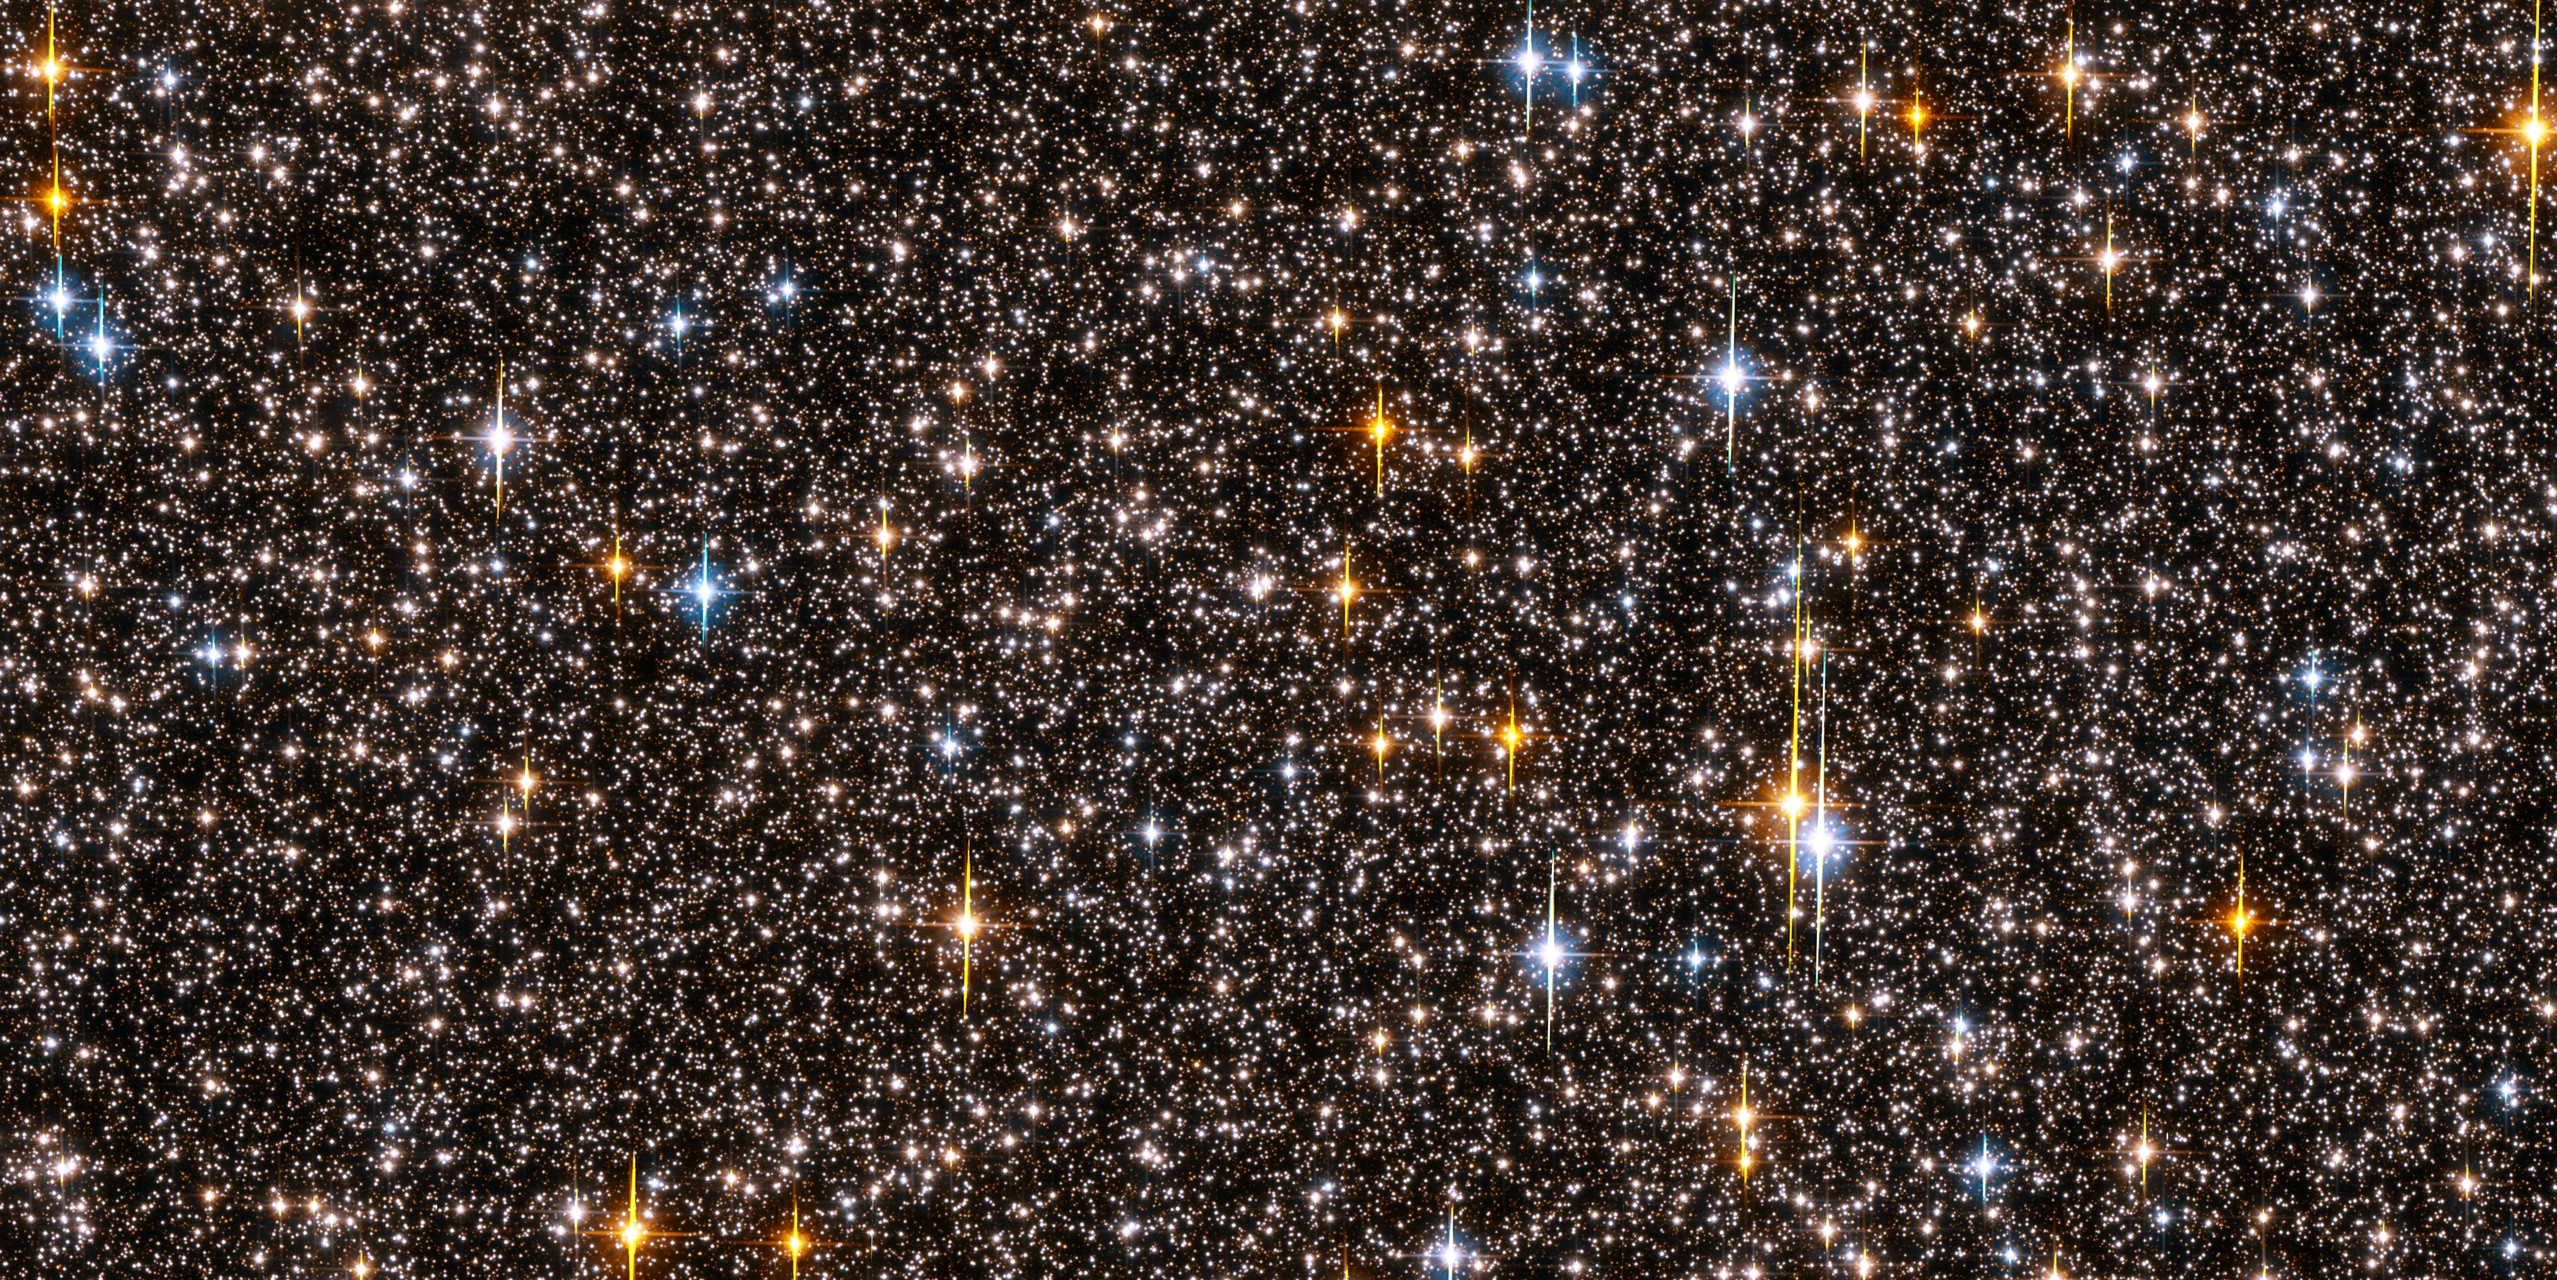 A picture released October 4, 2006 by the European Space Agency shows one-half of the Hubble Space Telescope field of view with nine stars that are orbited by planets with periods of a few days. Planets so close to their stars with such short orbital periods are called 